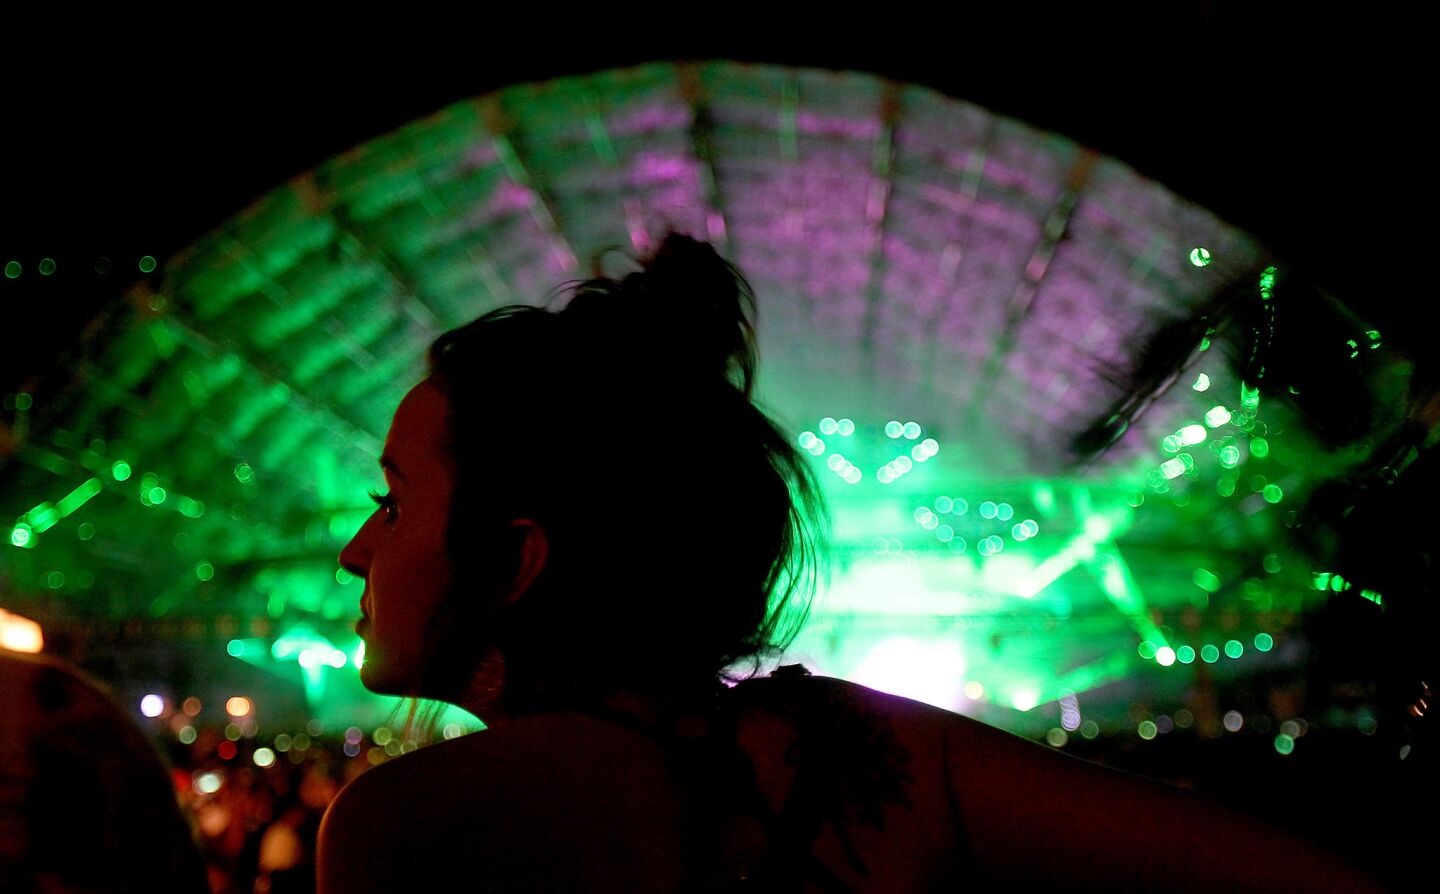 INDIO, CALIF. - APRIL 15, 2017. A woman dances the night away at the Sahara Stage on day two of the Coachella Music and Arts Festival in Indio on Saturday, April 15, 2017. (Luis Sinco/Los Angeles Times)